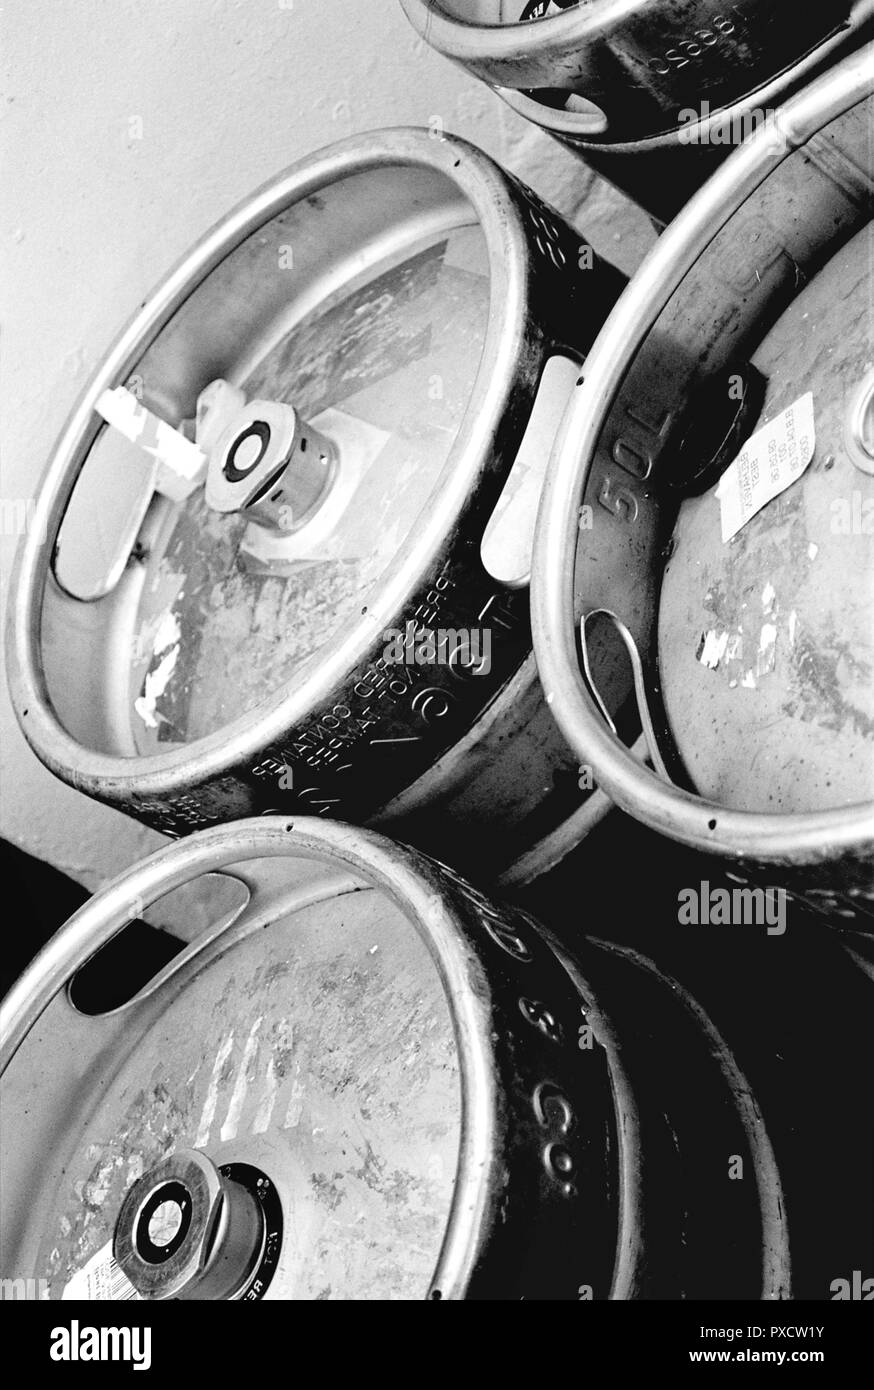 Steel metal beer kegs outside a Glasgow pub. This was taken between 2005-2006 on photographic film. Stock Photo